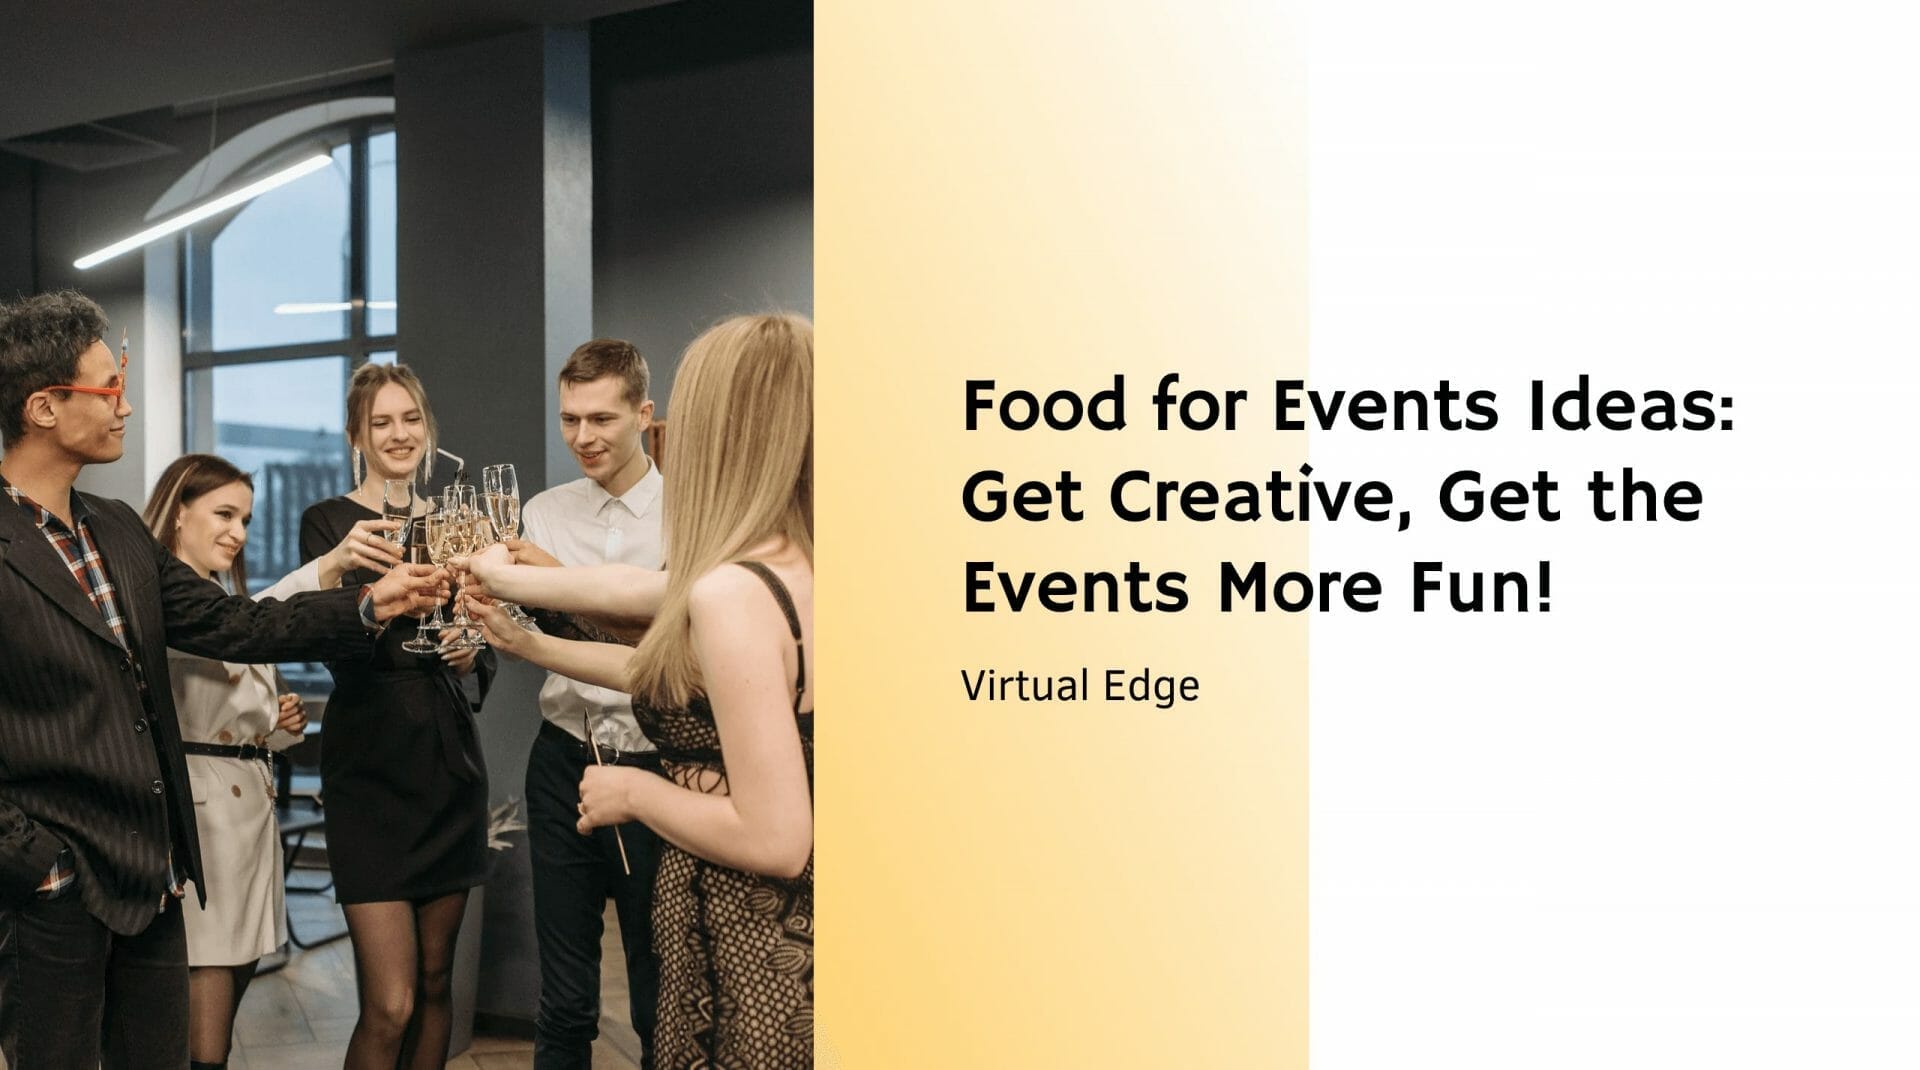 Food for Events Ideas: Get Creative, Get the Events More Fun!